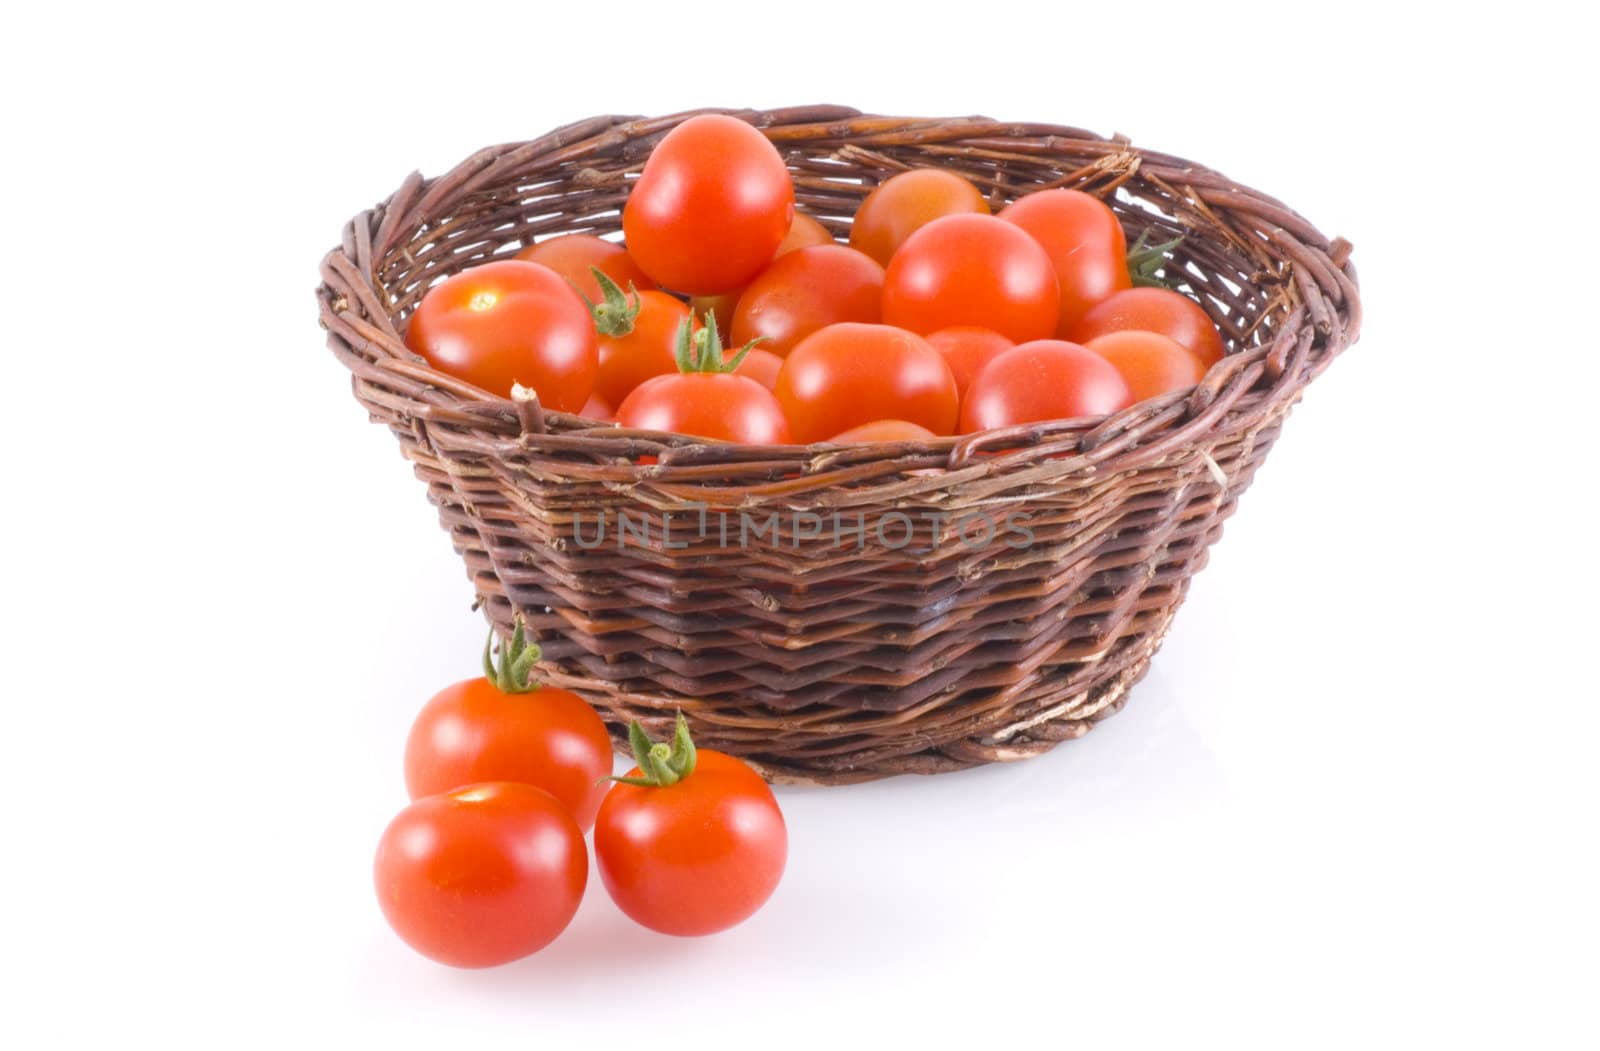 Basket full of tomatoes, with a few next to it, isolated on white.